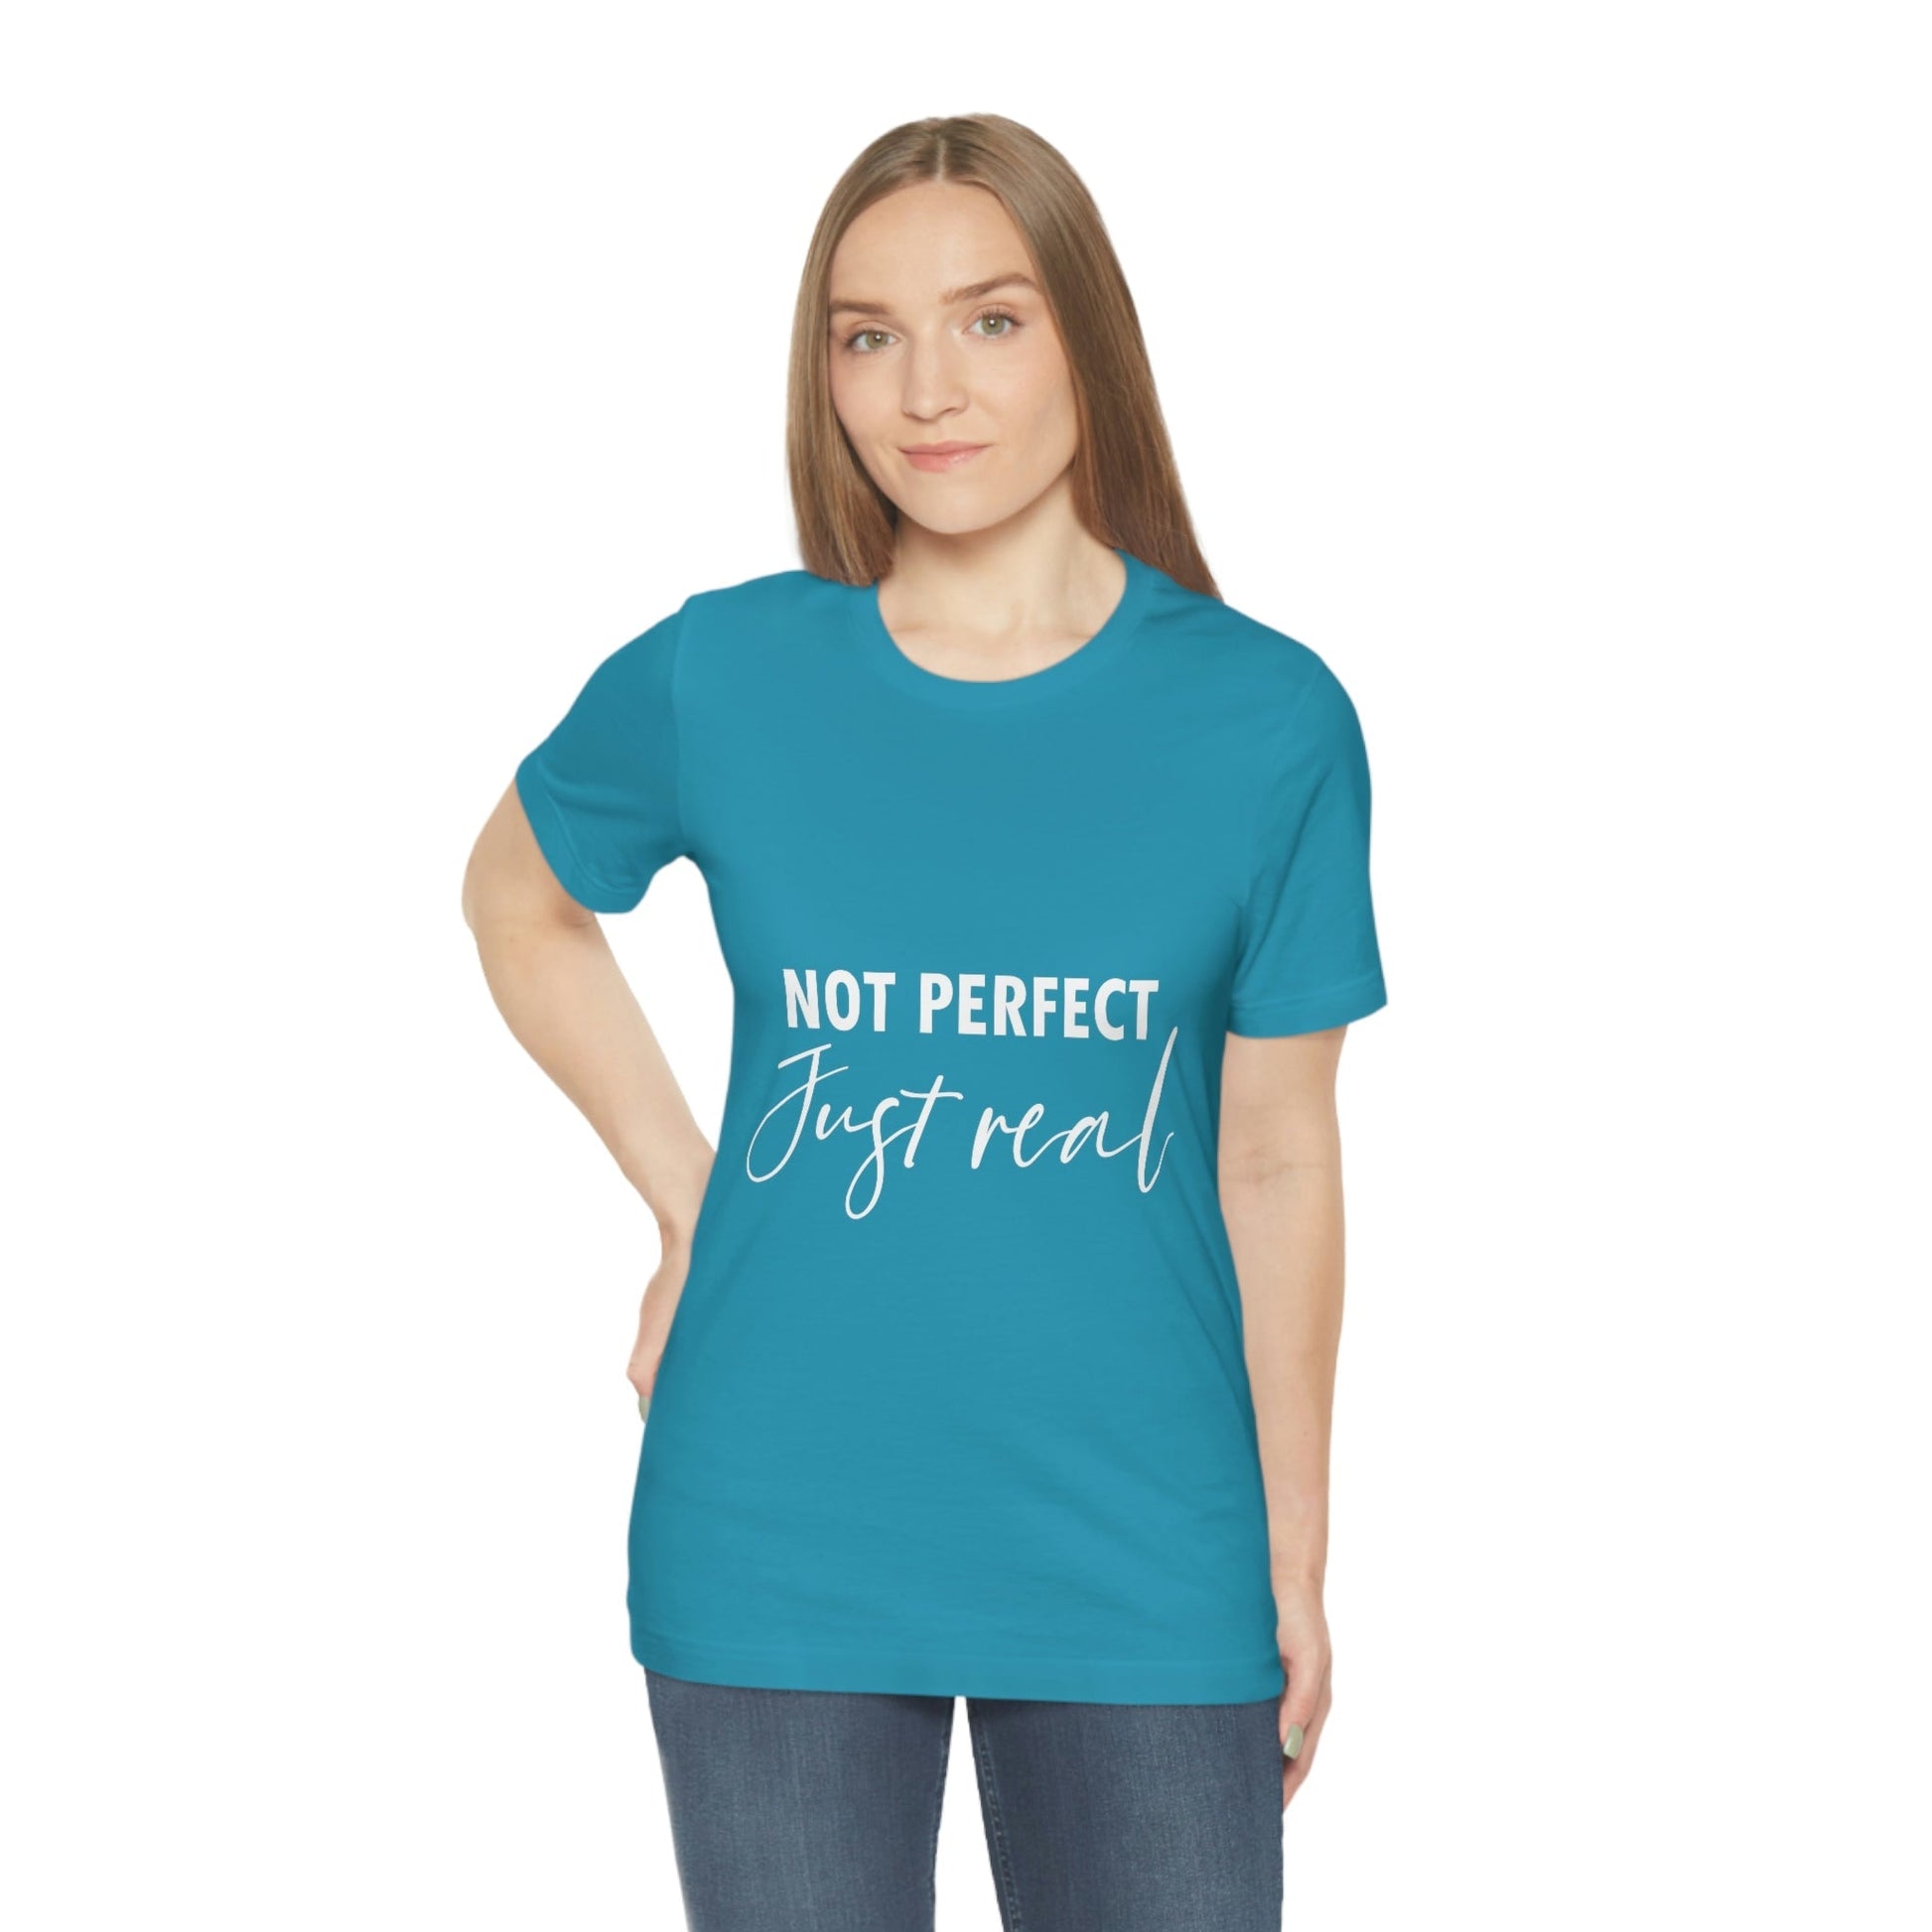 Not Perfect Just Real Empowering Quotes Unisex Jersey Short Sleeve T-Shirt Ichaku [Perfect Gifts Selection]